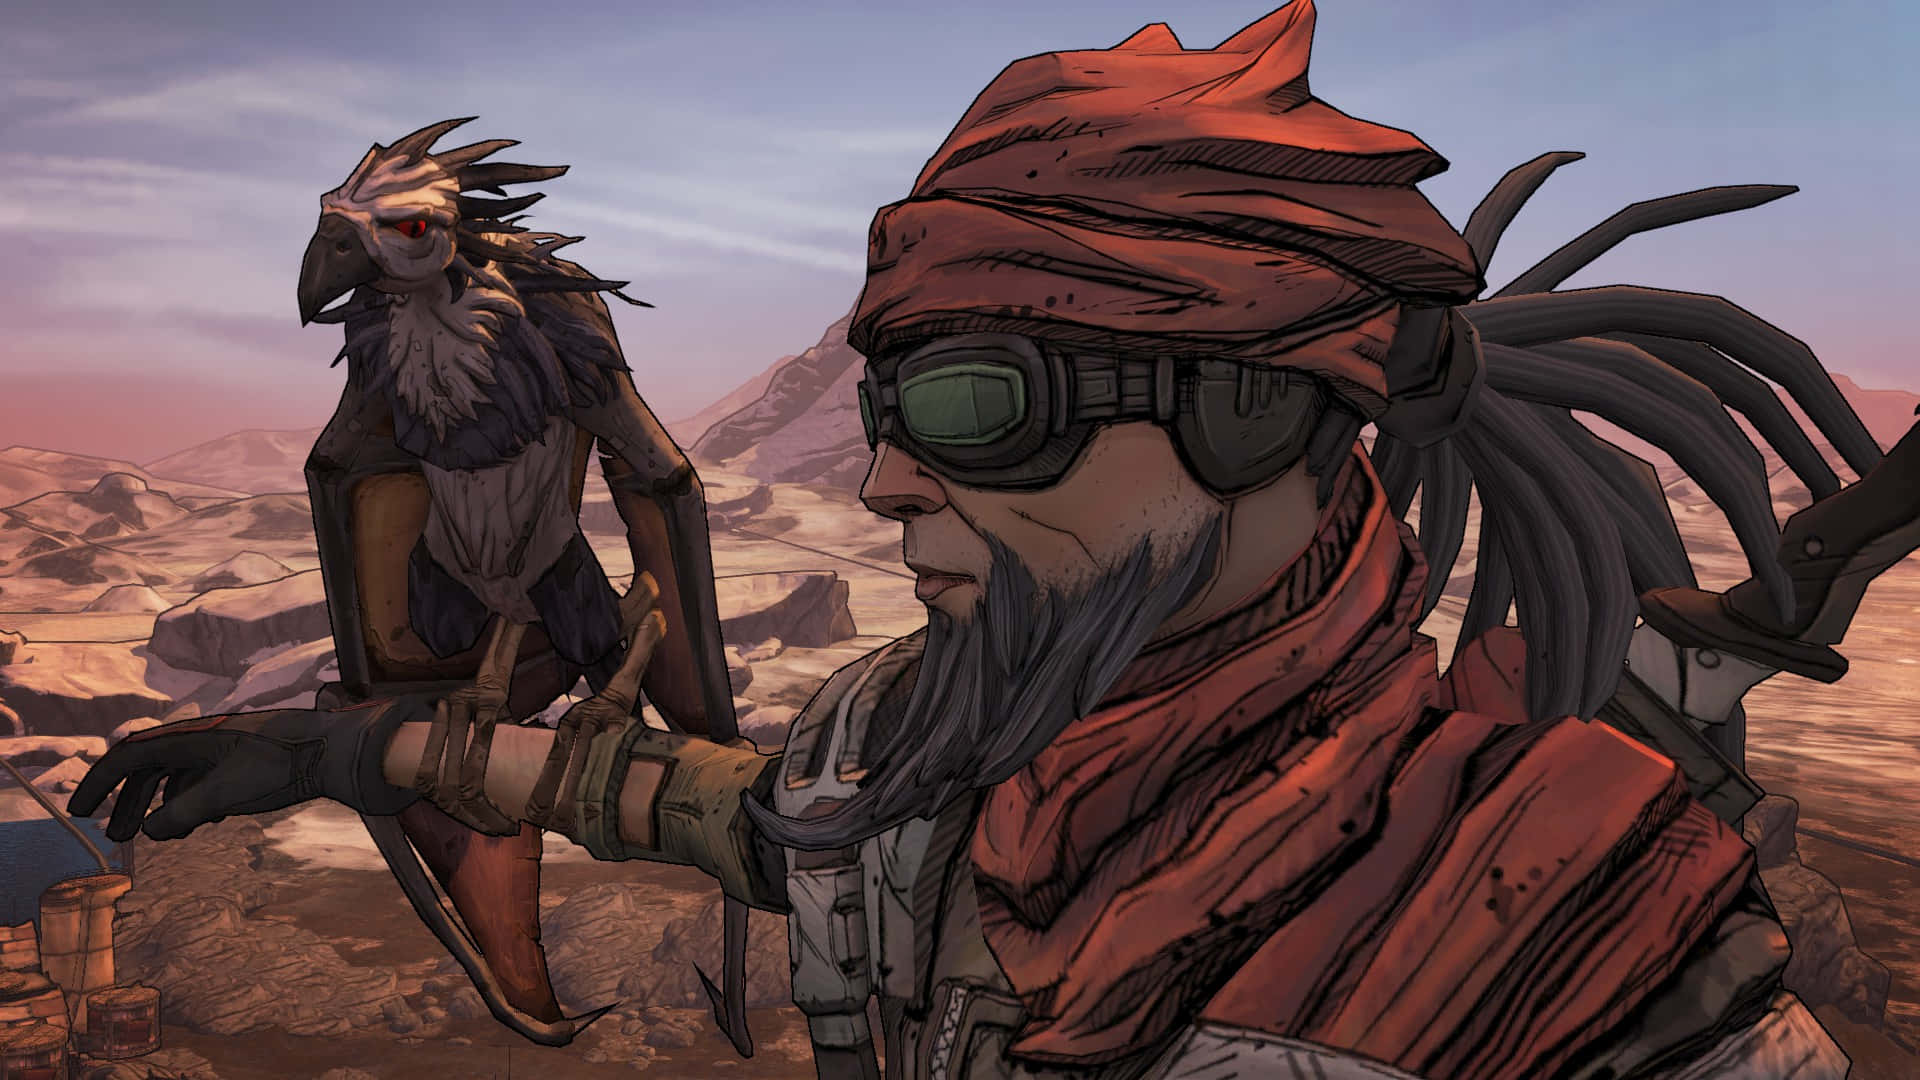 Borderlands action-packed game artwork, featuring iconic gaming characters